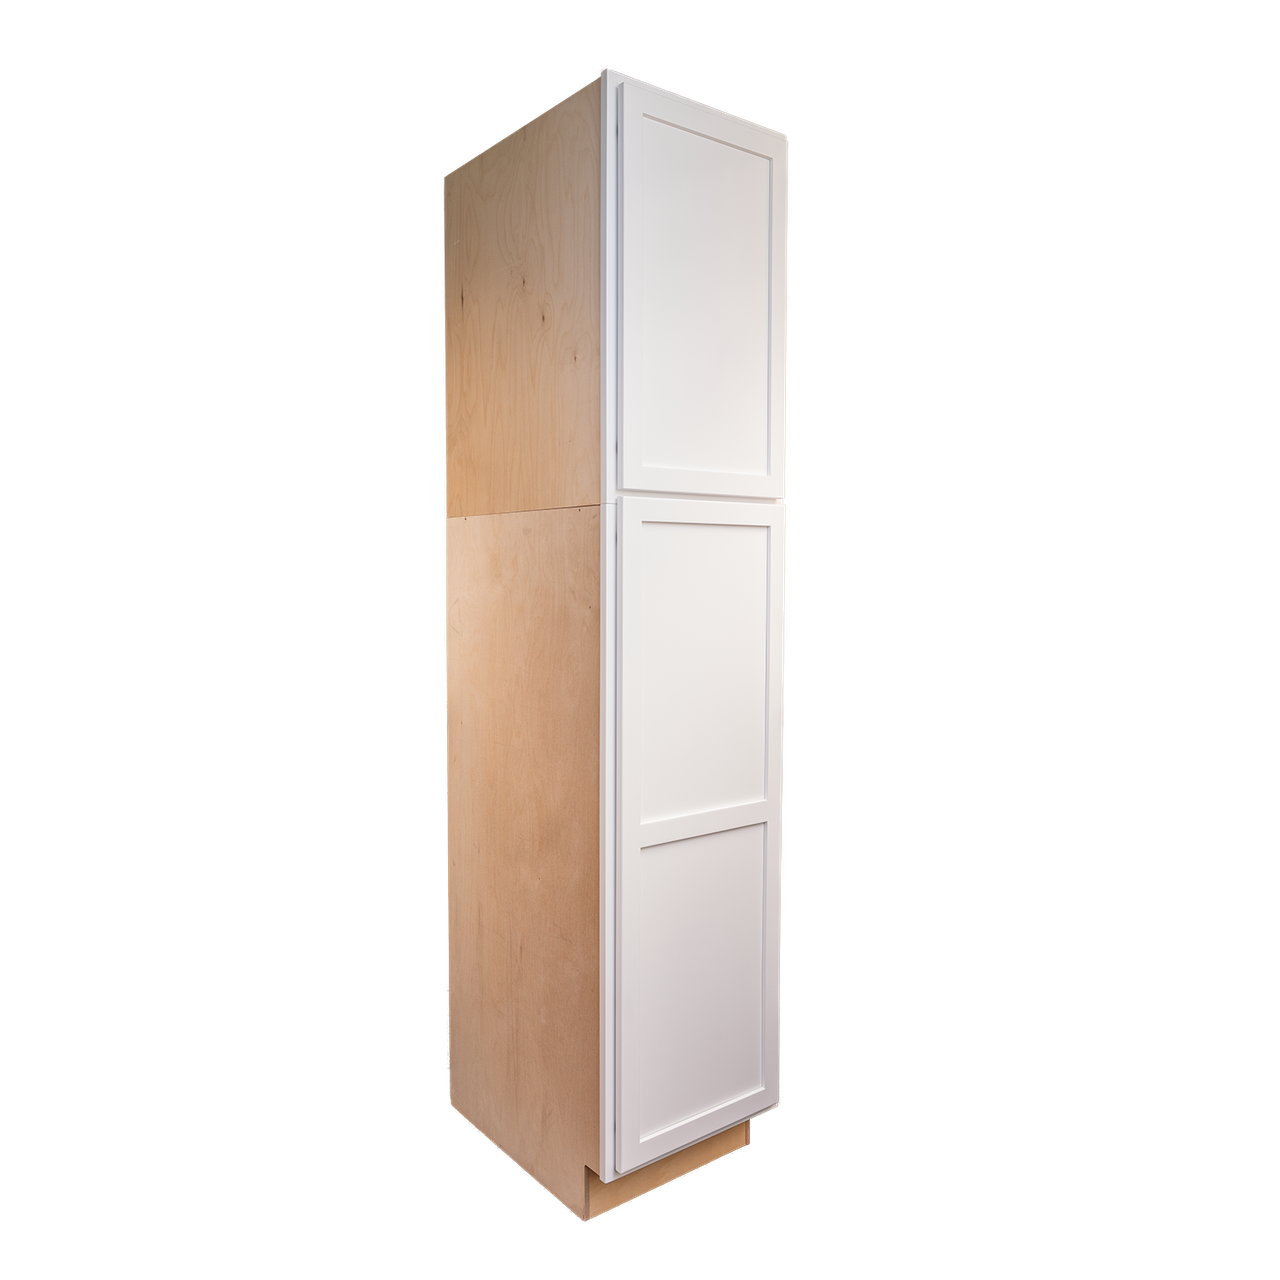 Quicklock RTA (Ready-to-Assemble) Pure White Pantry Cabinet 24"W x (84", 90", 96"H)